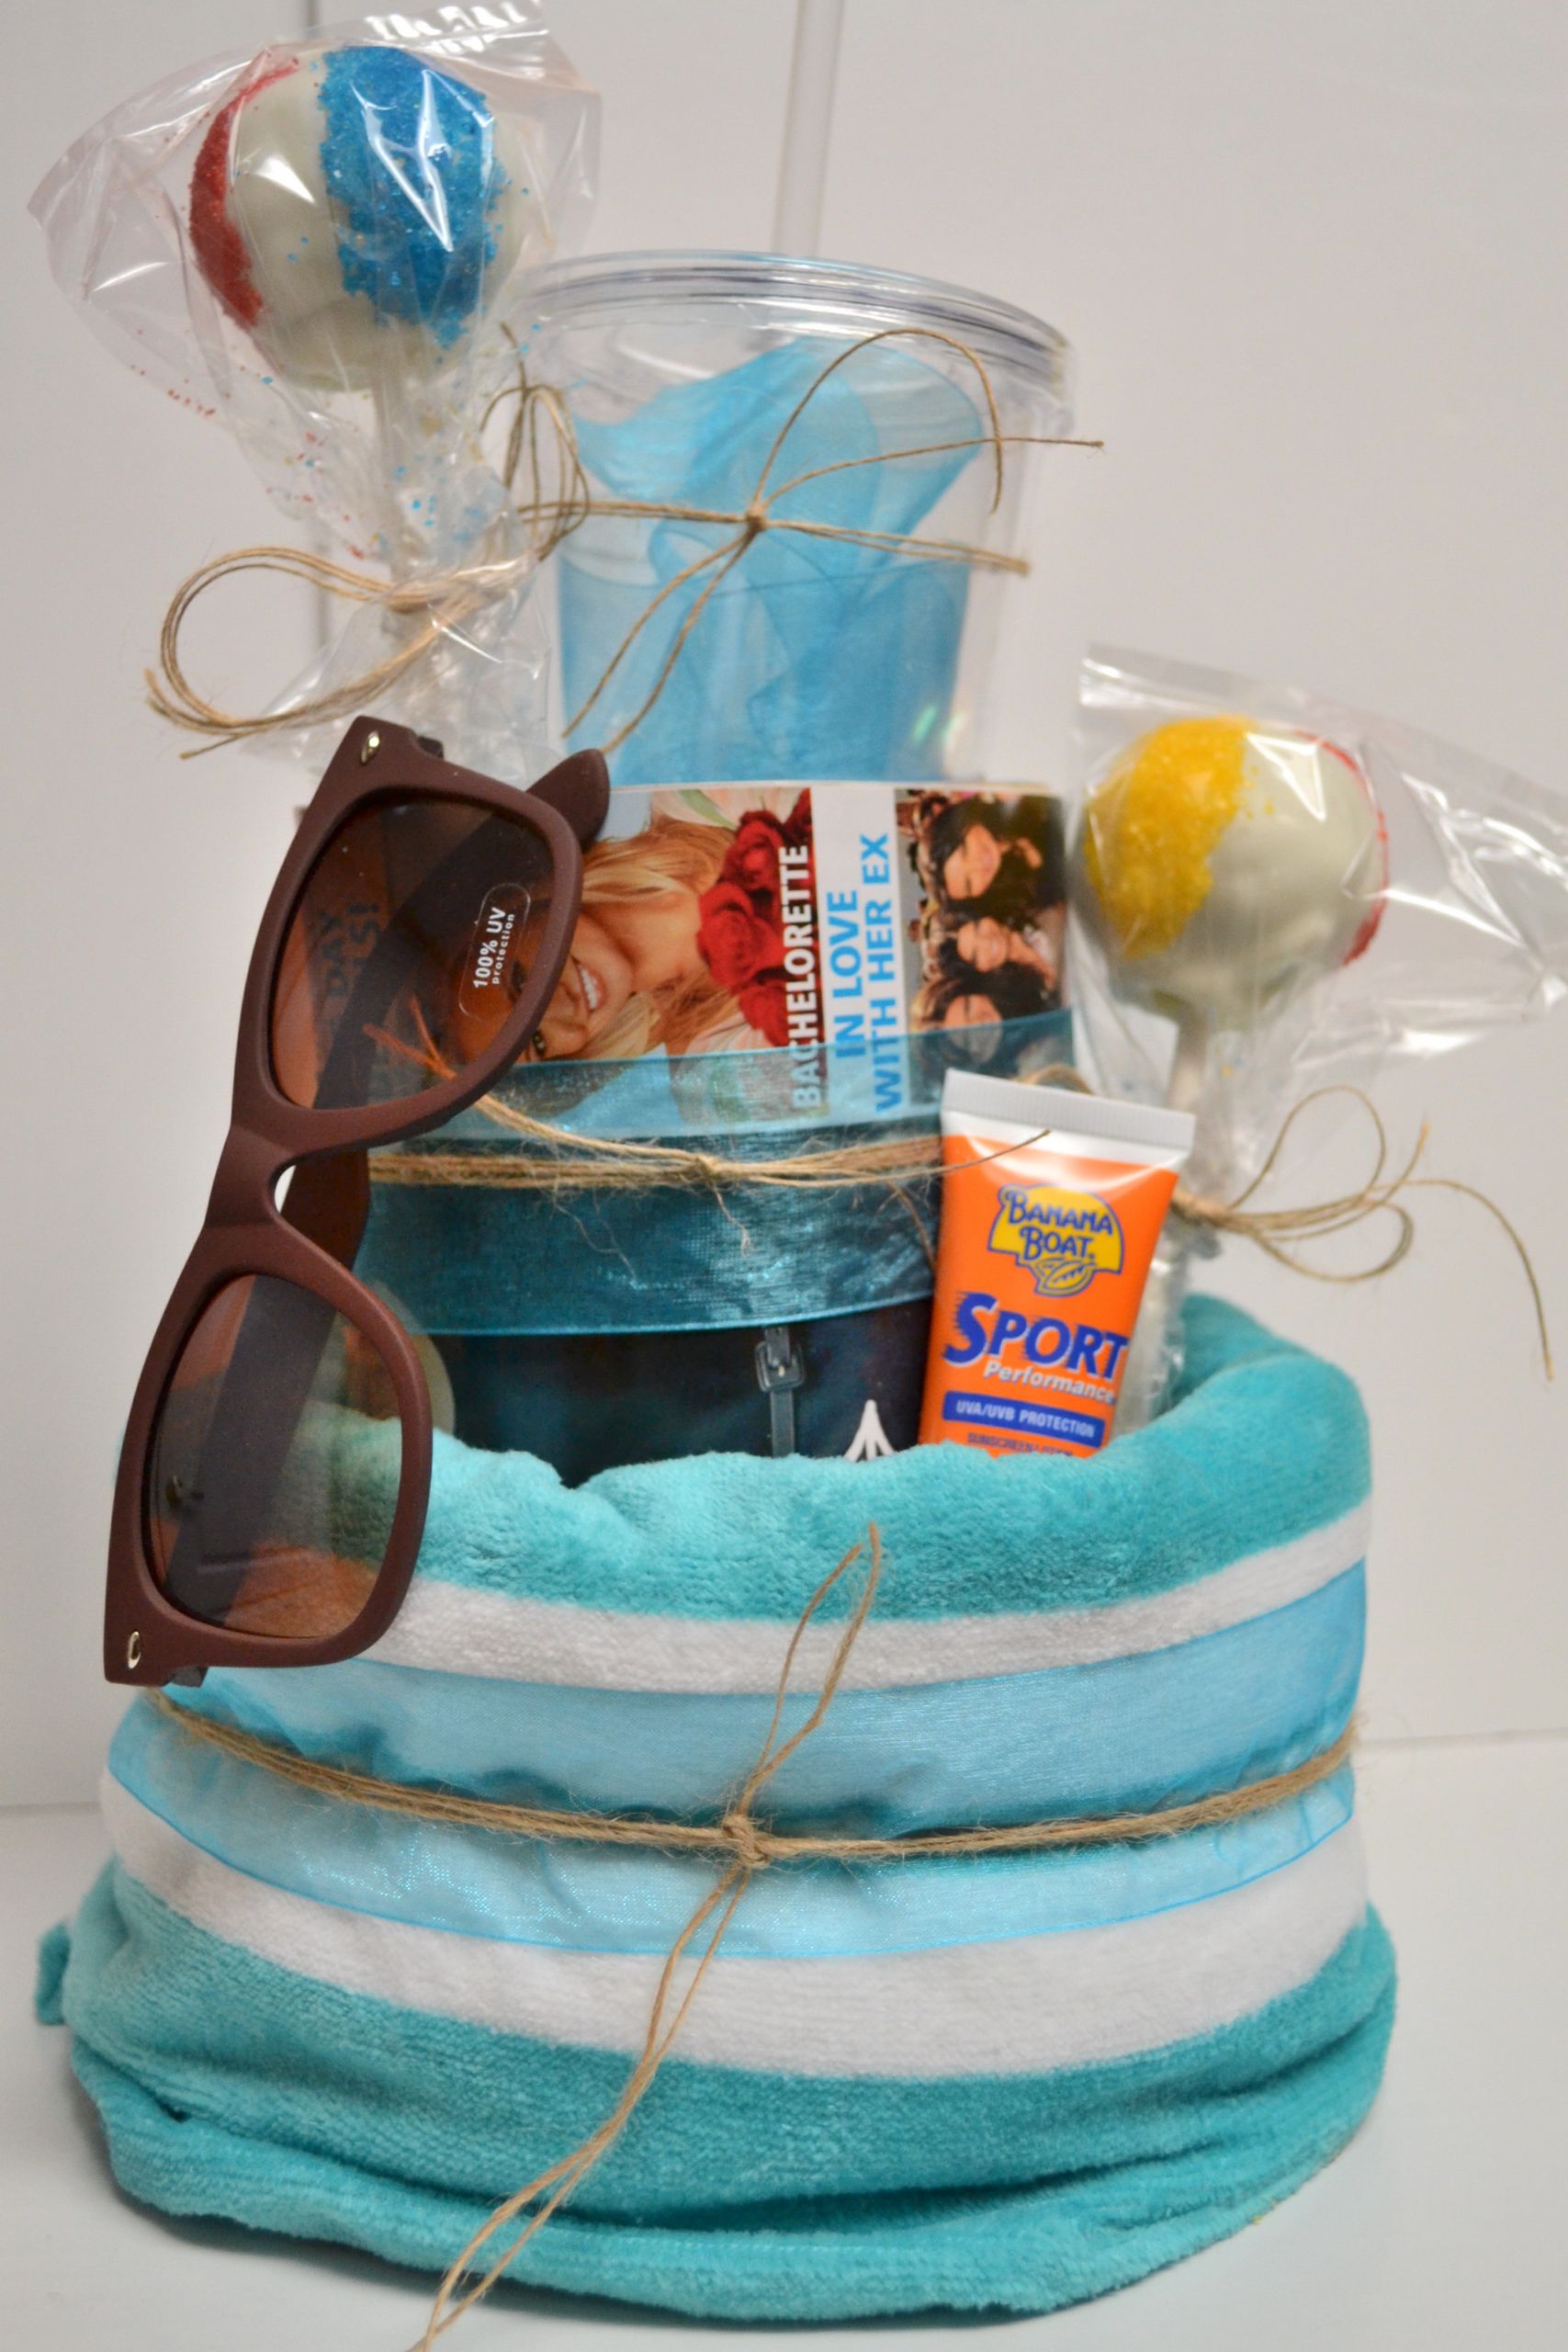 9 Awesome Beach Gift Basket Ideas For Adults for Your Next Vacation